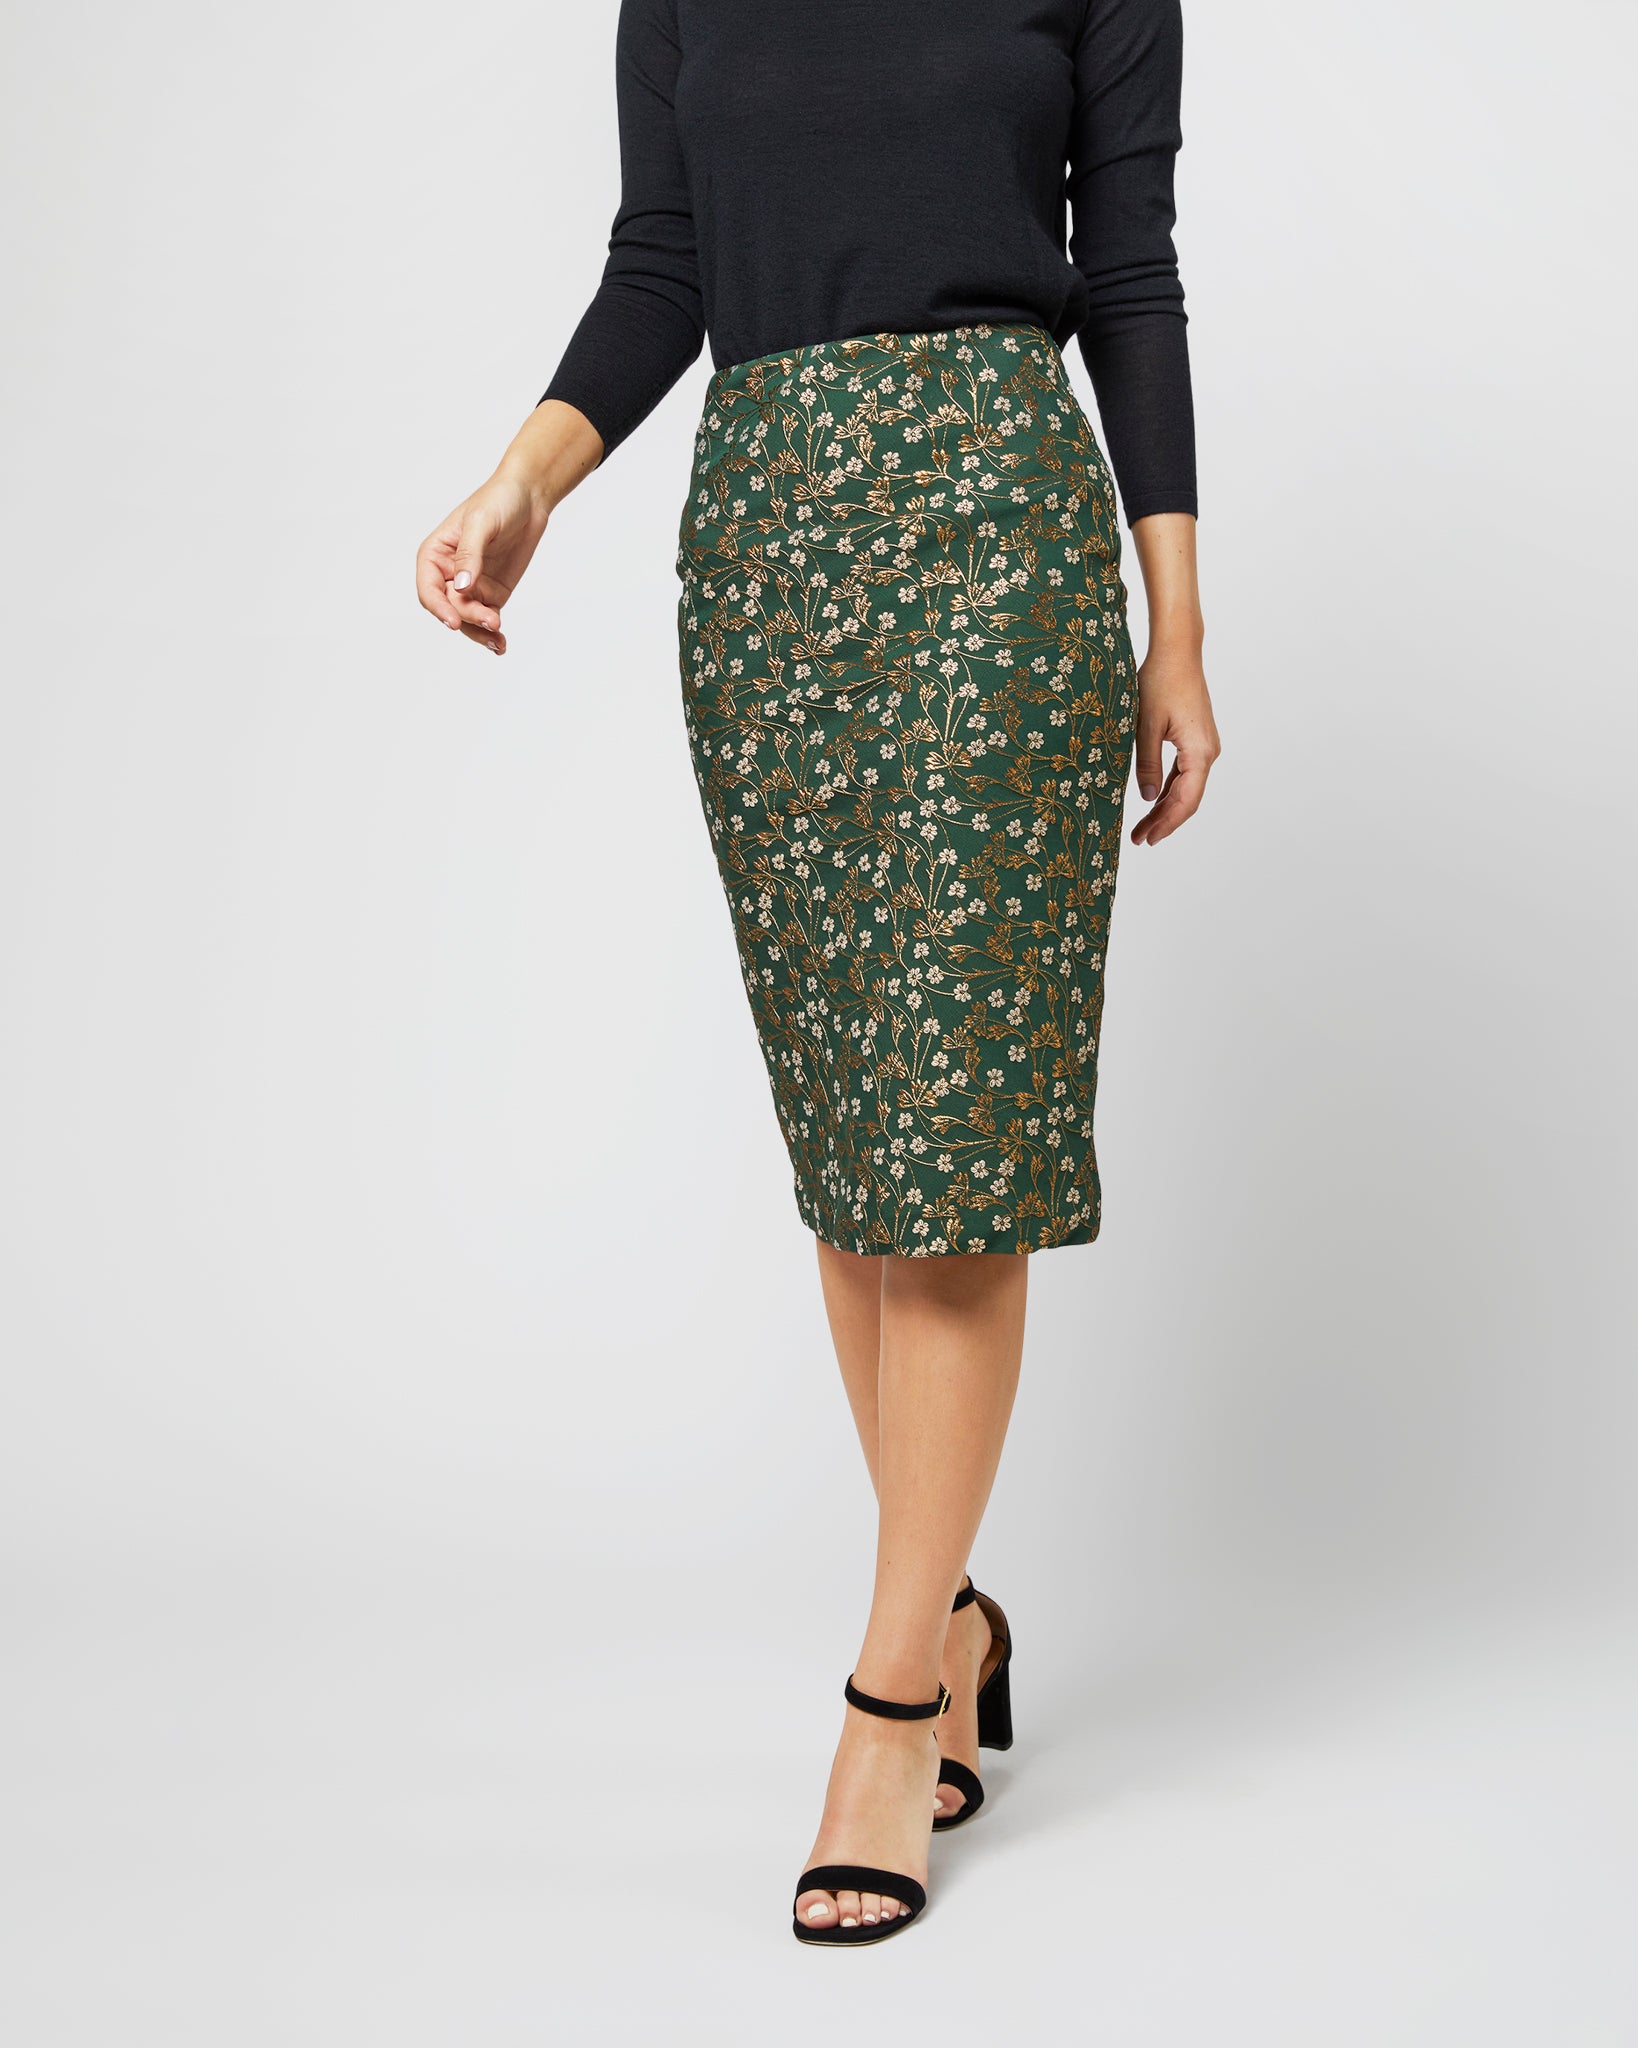 Pull-On Skirt in Hunter/Gold Floral Jacquard